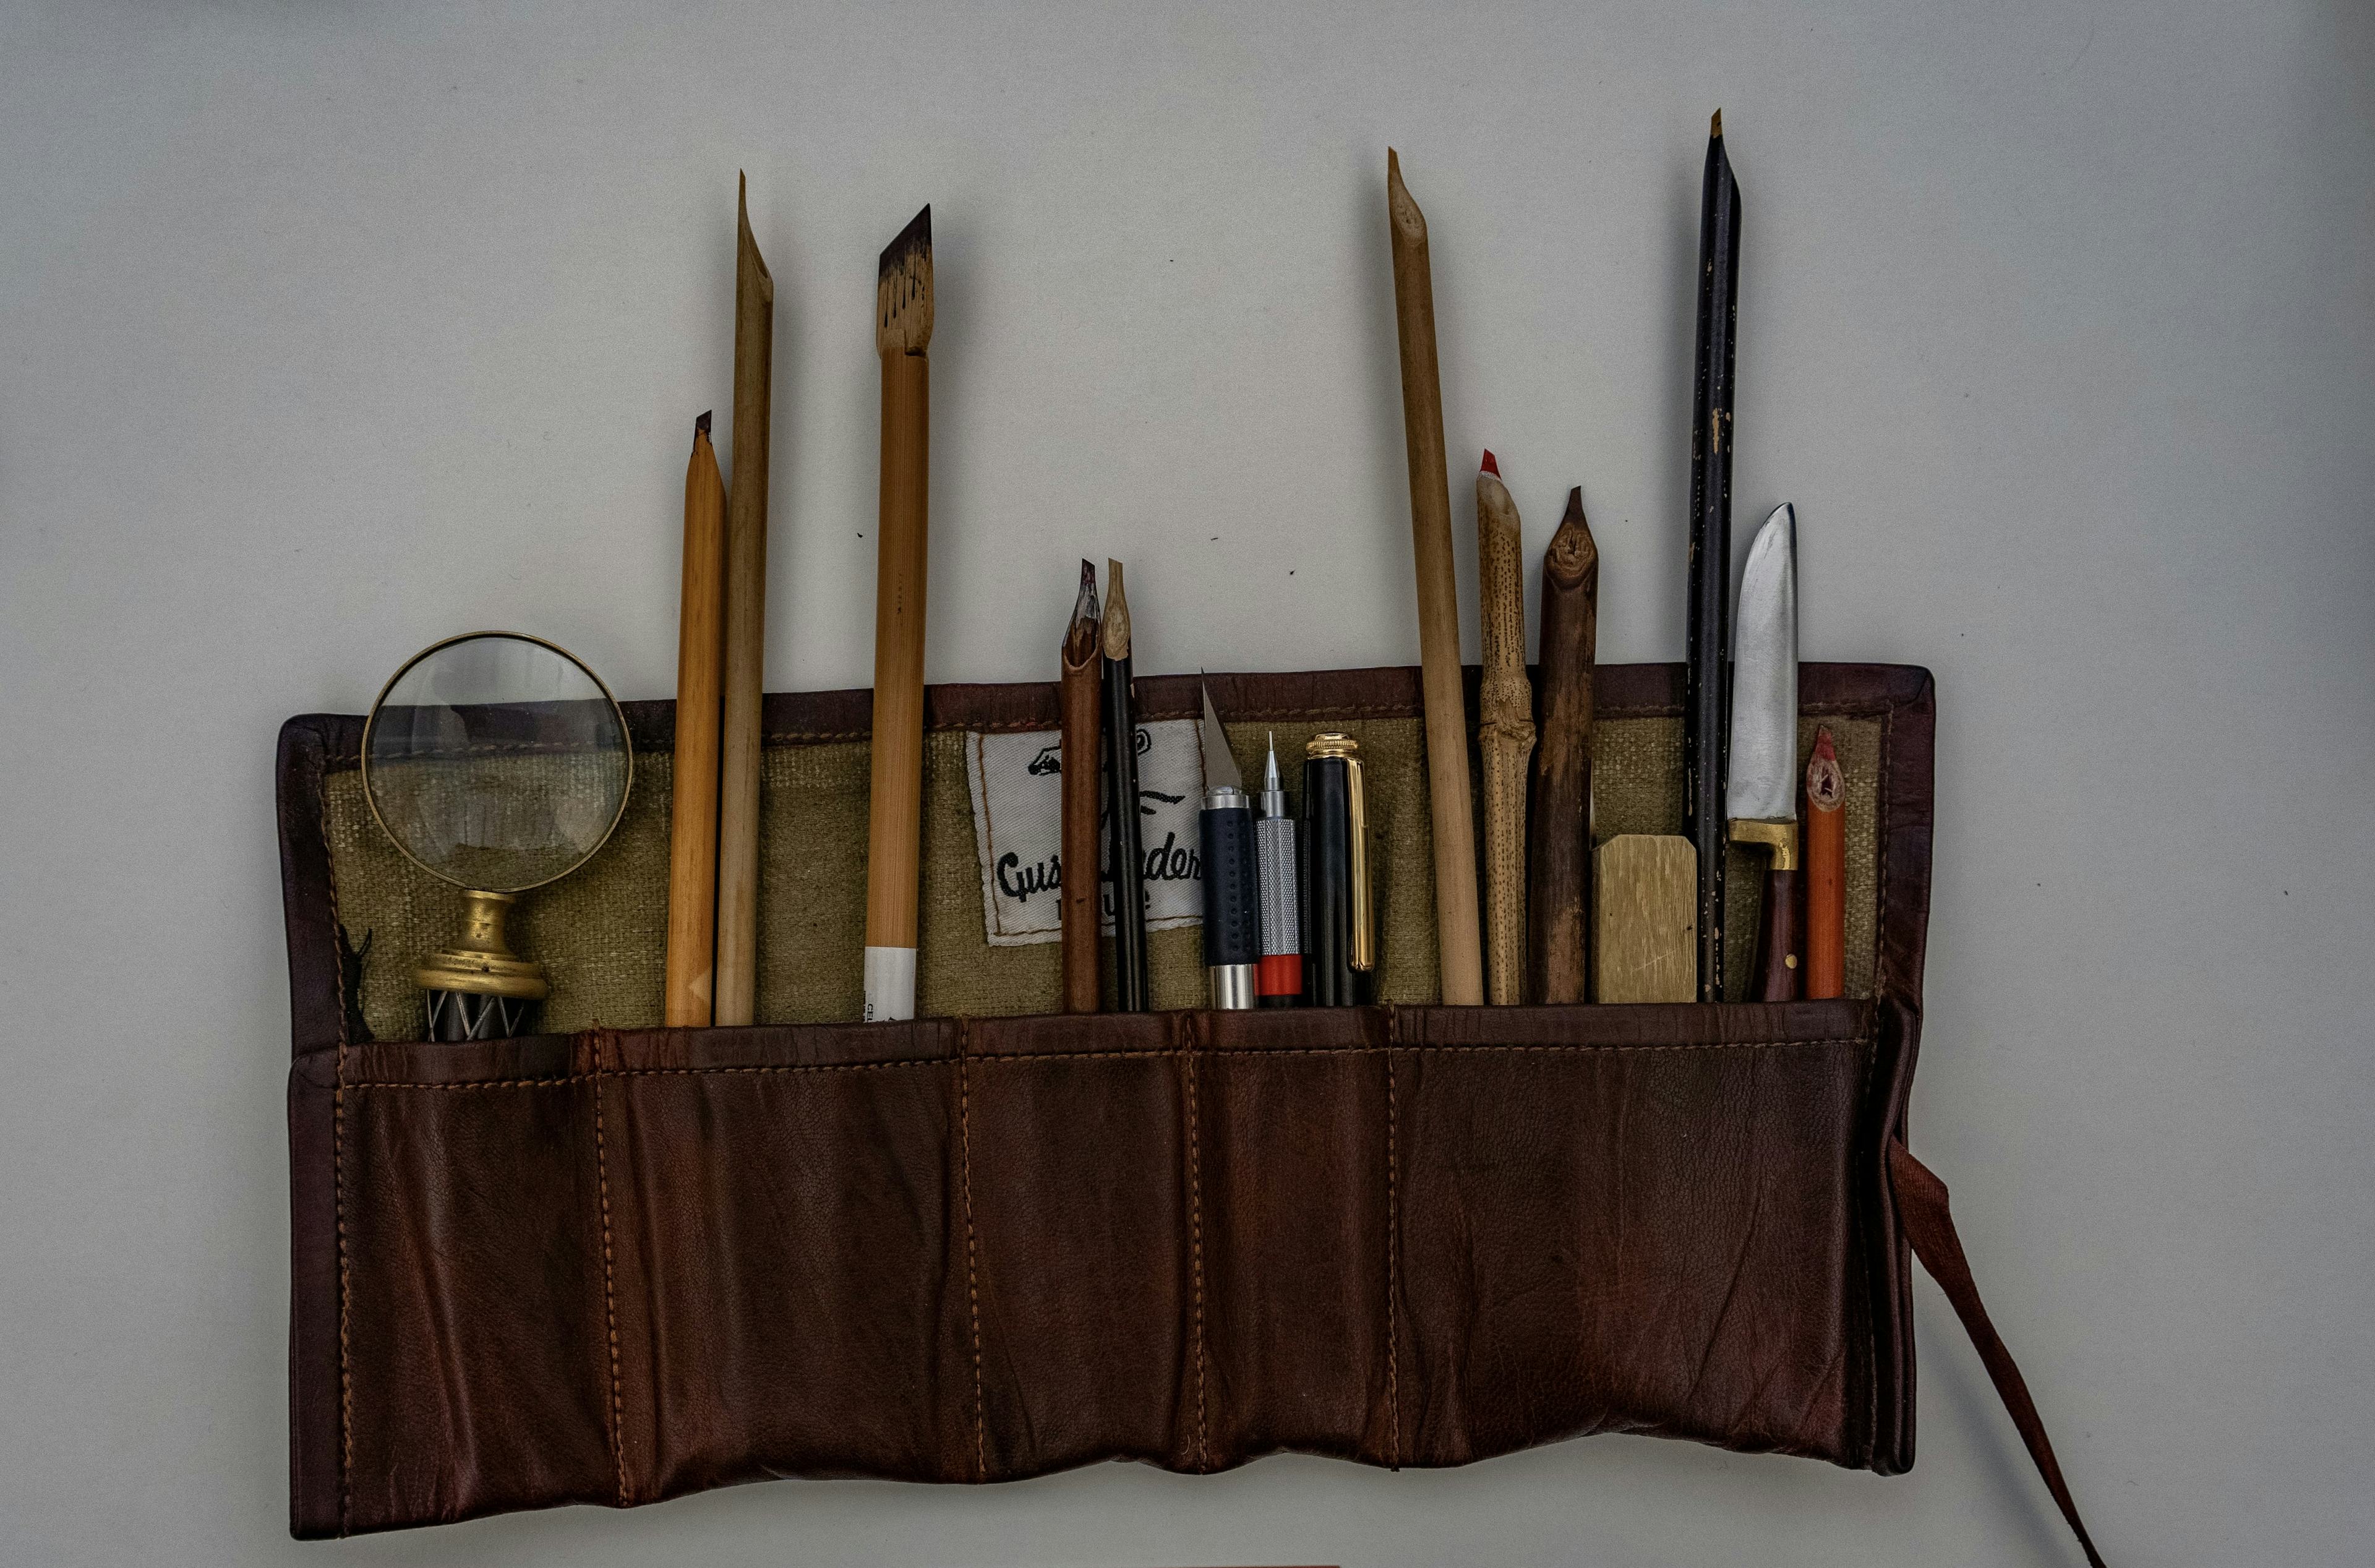 Arabic calligraphy tool set in a brown tool case